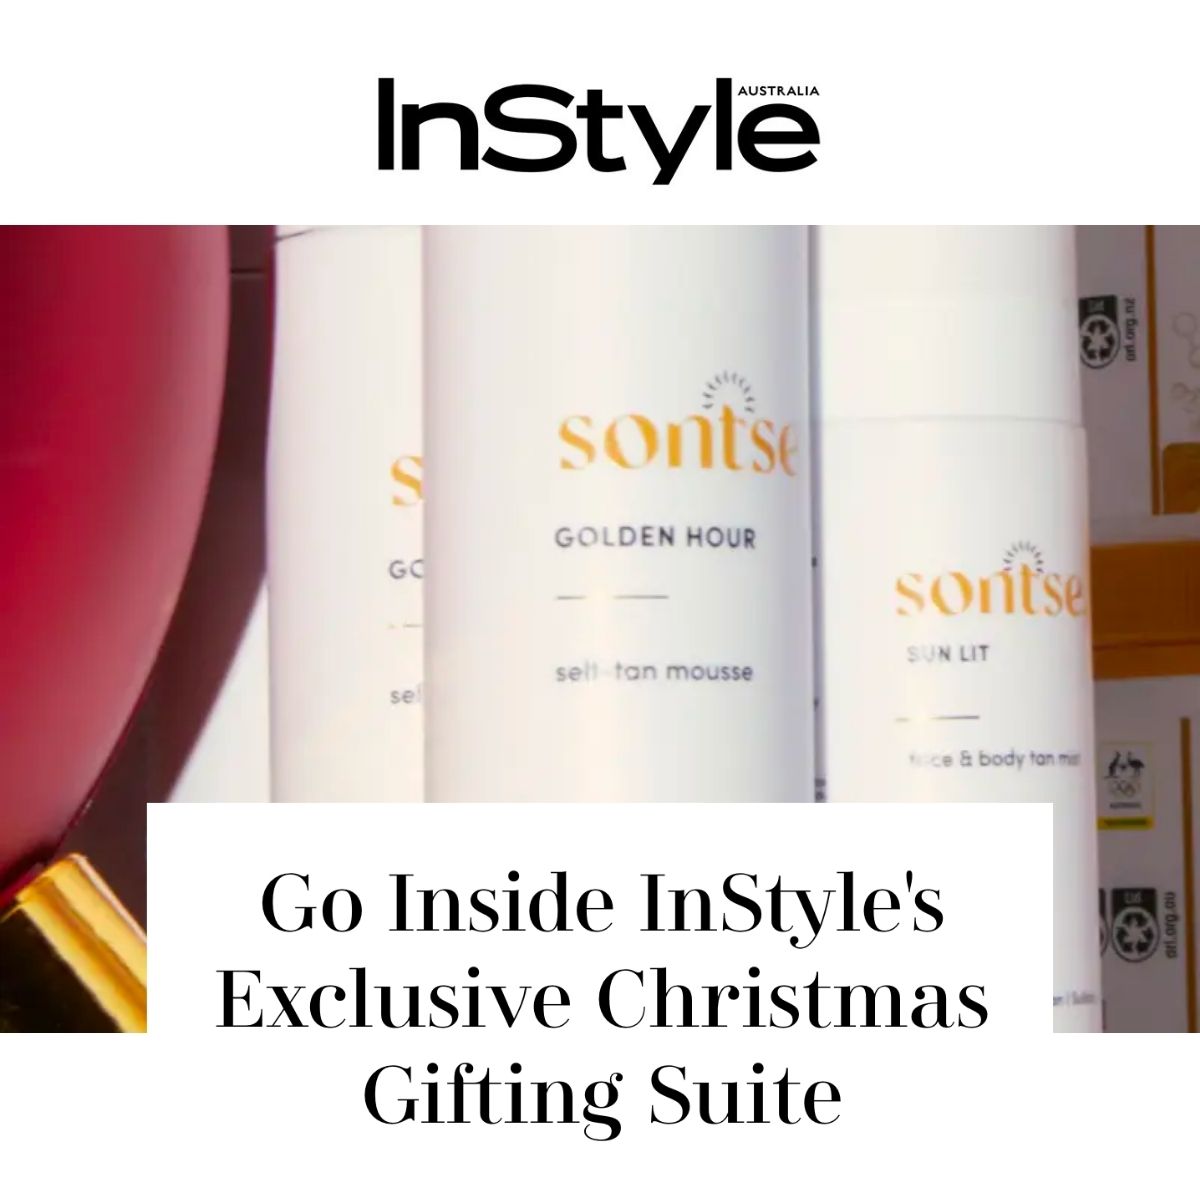 Go Inside InStyle's Exclusive Christmas Gifting Suite